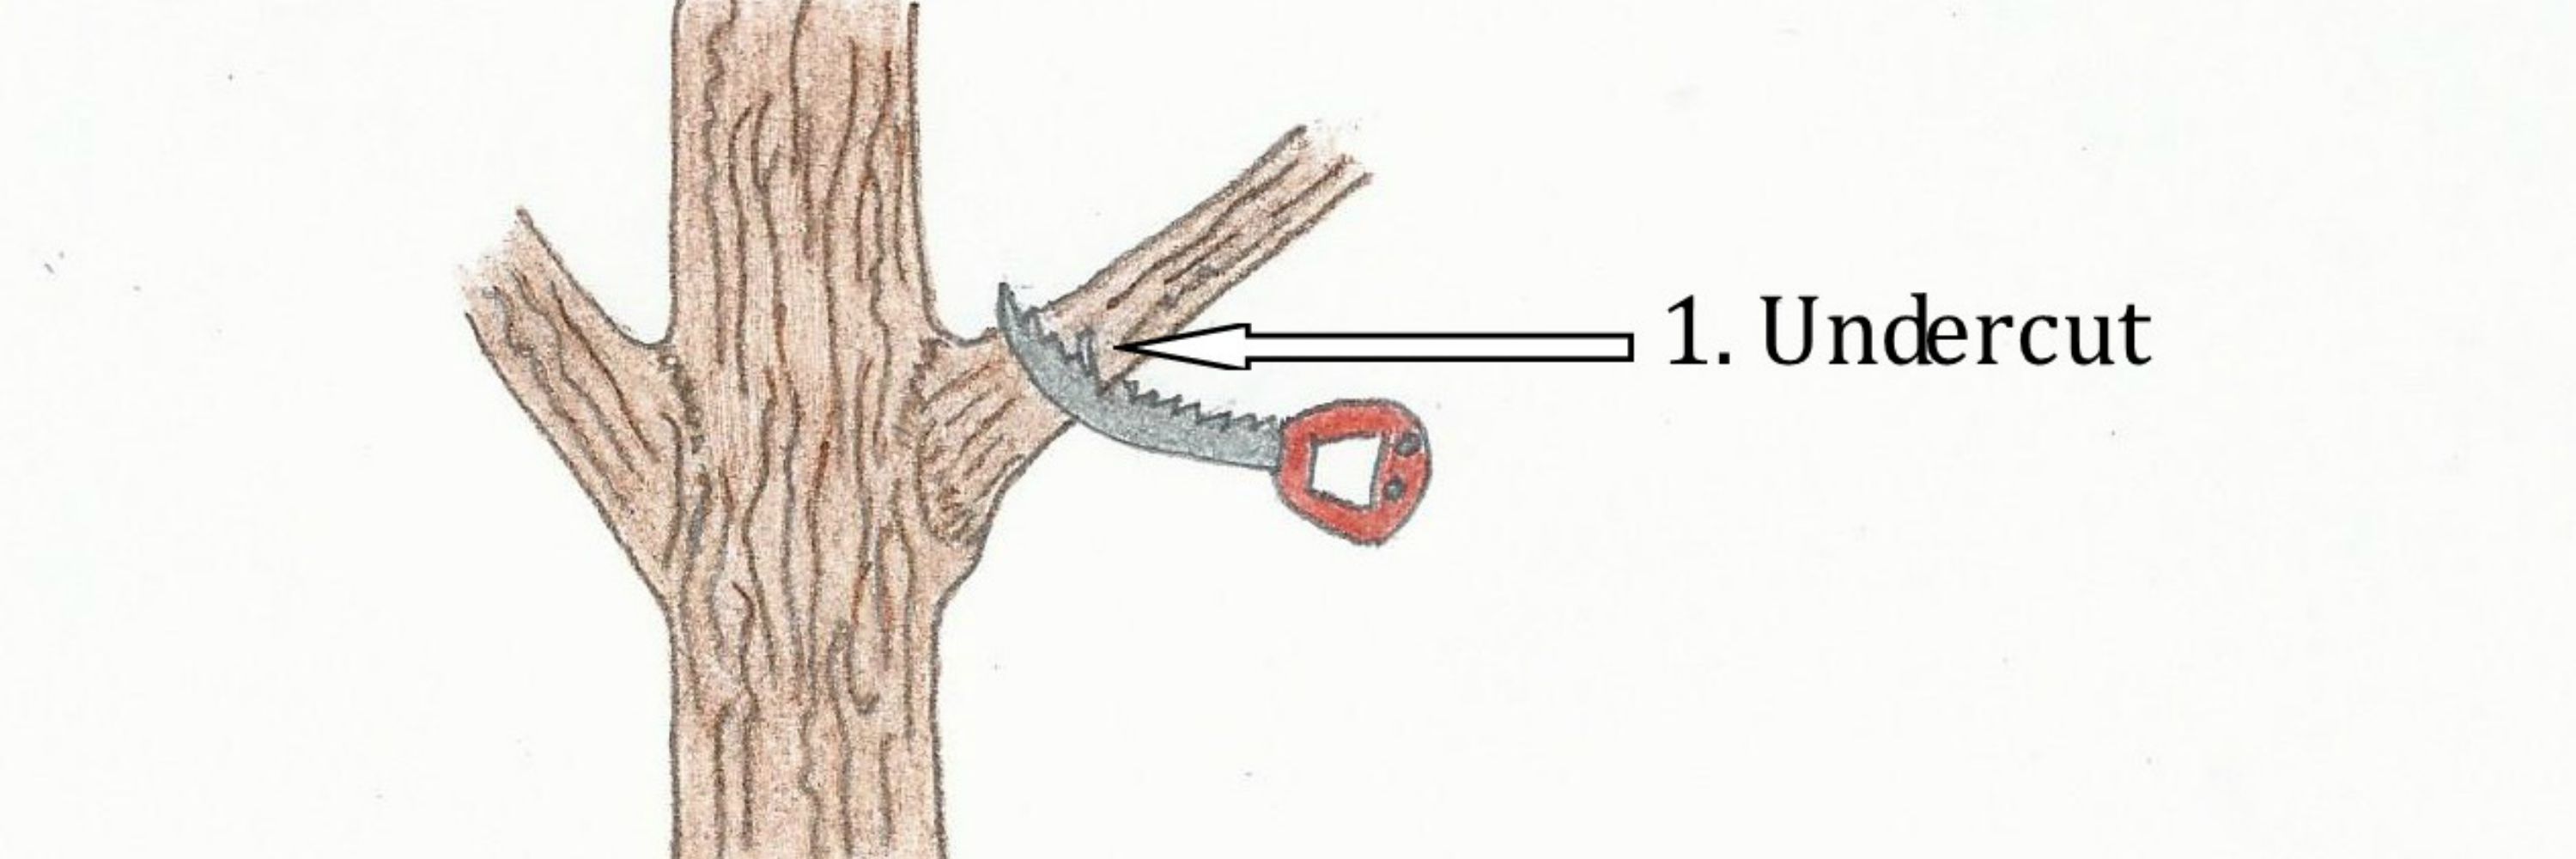 Tree Training and Tree Pruning Banner - Image of Tree Pruning Example